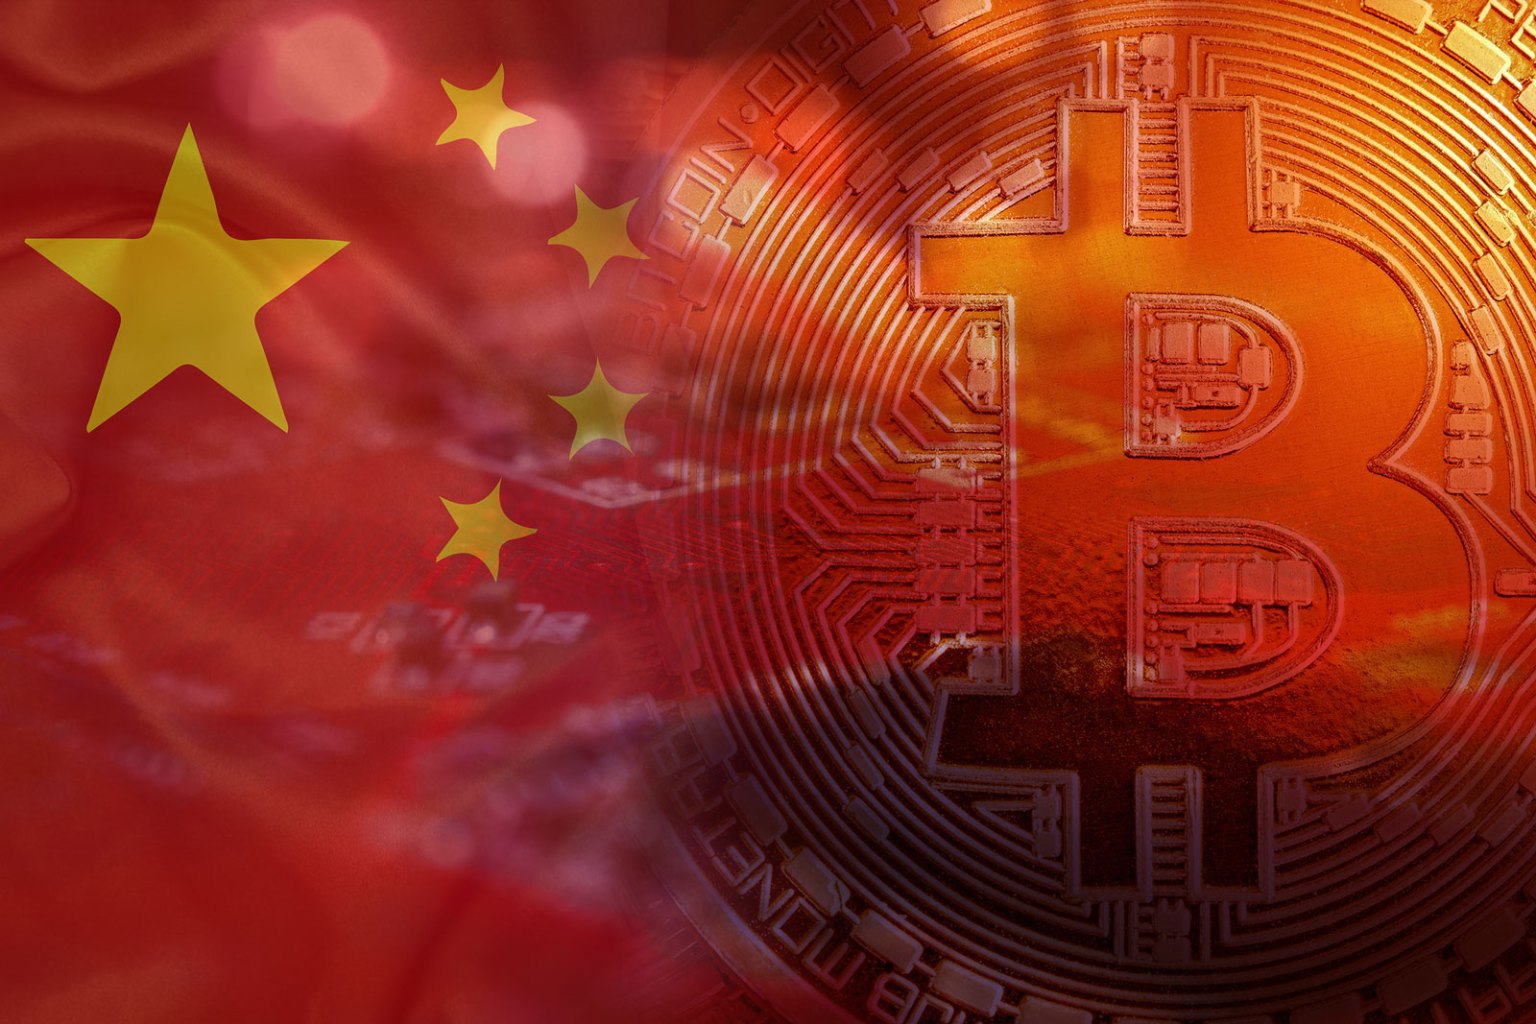 French group blames China-founded crypto platform for missing millions